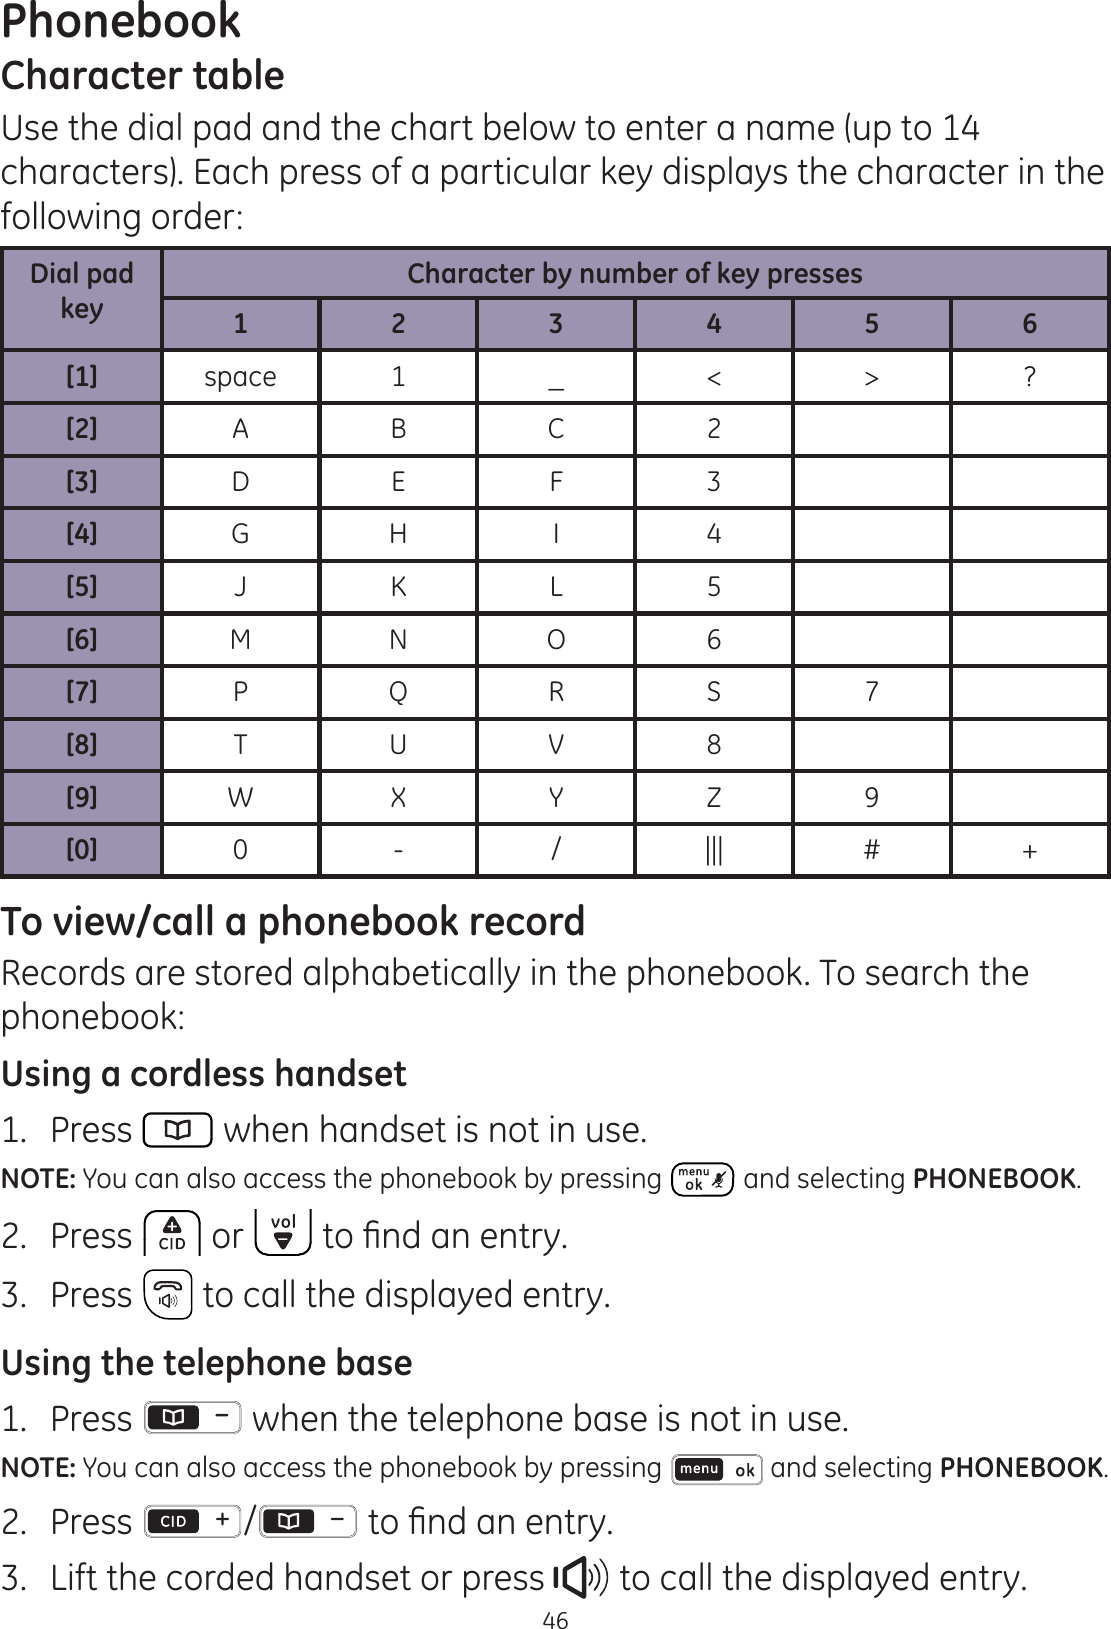 Phonebook46Character tableUse the dial pad and the chart below to enter a name (up to 14 characters). Each press of a particular key displays the character in the following order:Dial pad keyCharacter by number of key presses1 2 3 4 5 6[1] space 1 _ &lt; &gt; ?[2] A B C 2[3] D E F 3[4] G H I 4[5] J K L 5[6] M N O 6[7] P Q R S 7[8] T U V 8[9] W X Y Z 9[0] 0 - / ||| # +To view/call a phonebook recordRecords are stored alphabetically in the phonebook. To search the phonebook:Using a cordless handset1.  Press   when handset is not in use.NOTE: You can also access the phonebook by pressing   and selecting PHONEBOOK.2.  Press  or  WR¿QGDQHQWU\3.  Press   to call the displayed entry. Using the telephone base1.  Press   when the telephone base is not in use.NOTE: You can also access the phonebook by pressing   and selecting PHONEBOOK.2.  Press  / WR¿QGDQHQWU\3.  Lift the corded handset or press   to call the displayed entry.